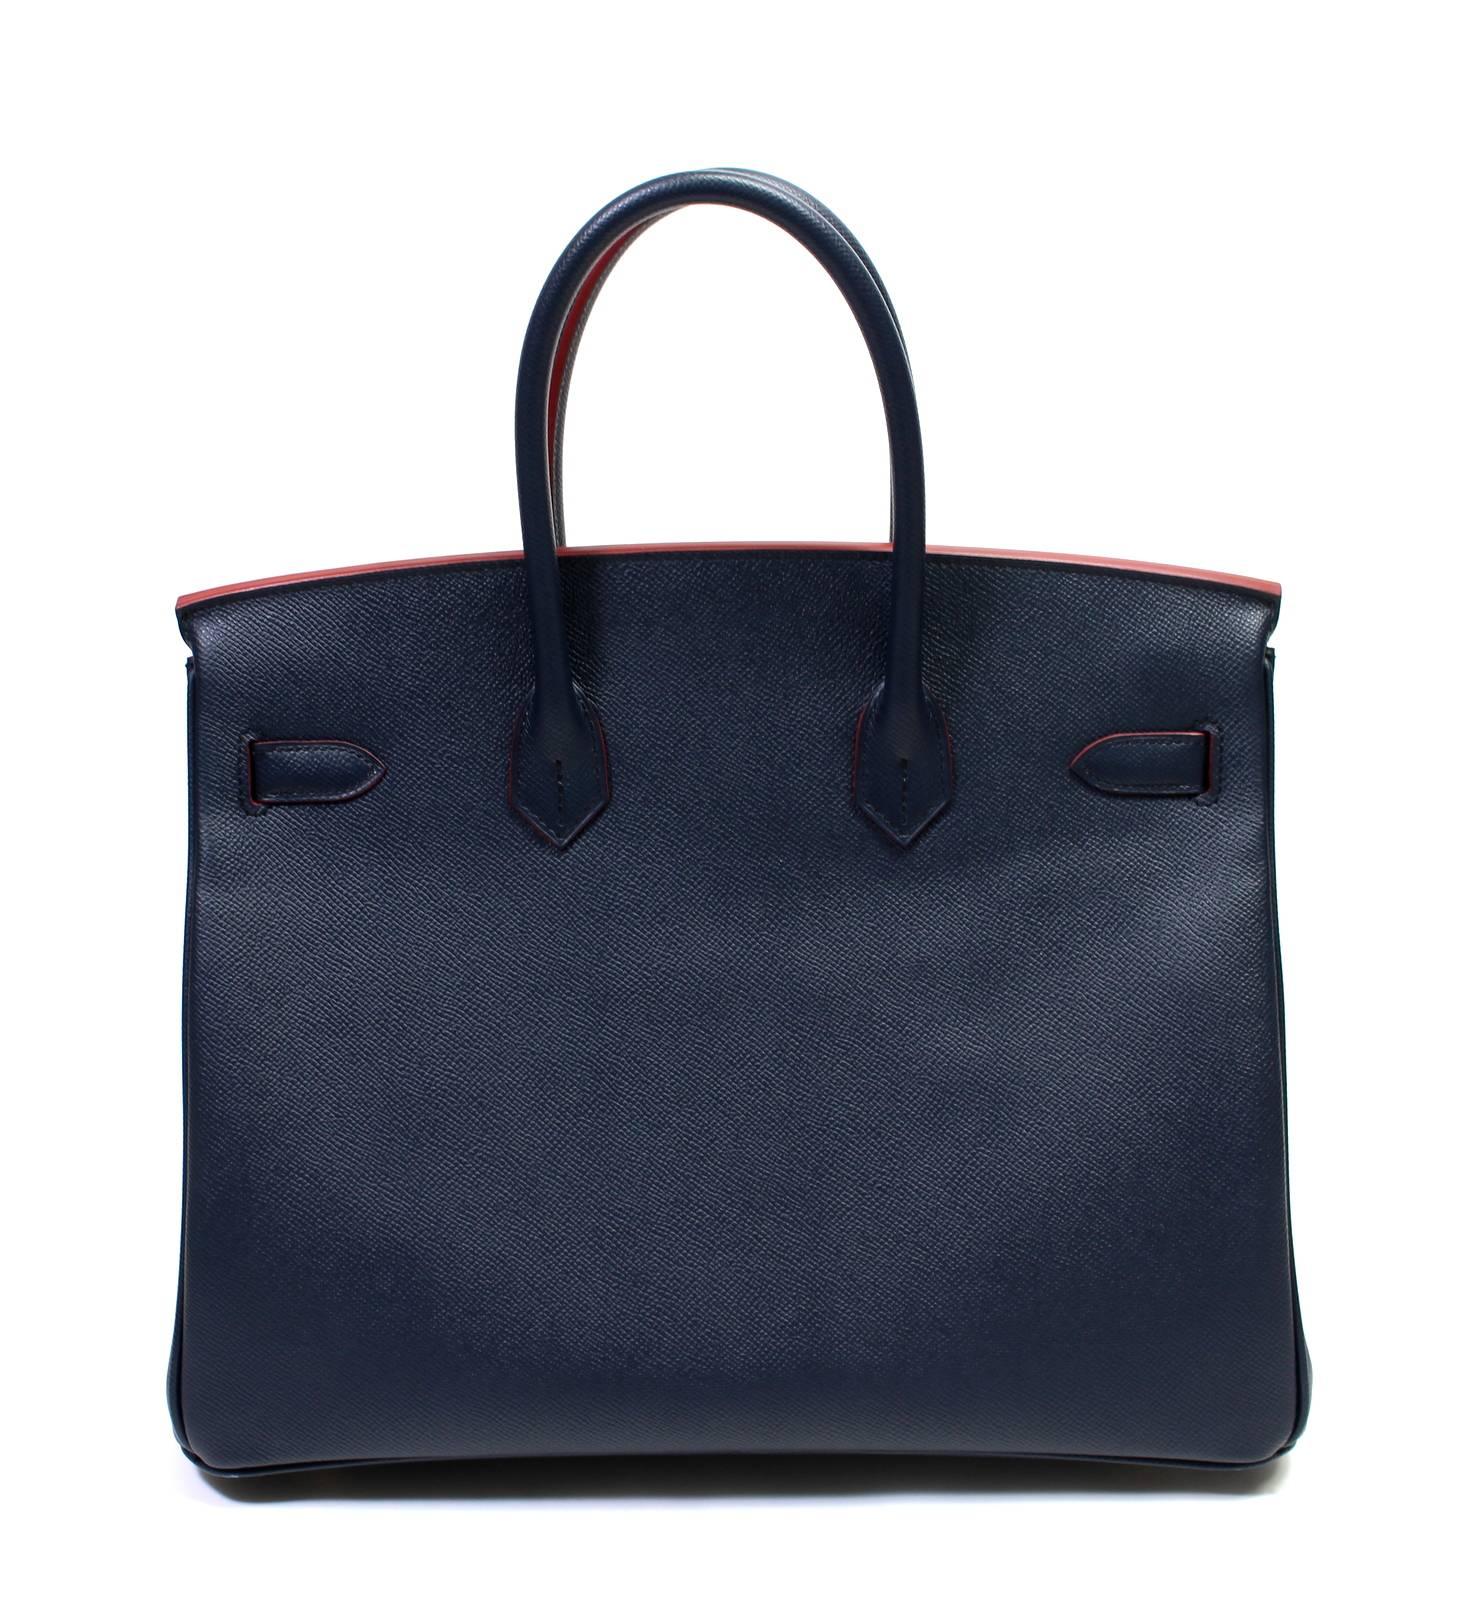 Hermès Bleu Indigo and Rouge H Epsom 35 cm Contour Birkin Bag- RARE Limited Style.  Store Fresh; Pristine with  plastic intact on the hardware.     Hermès bags are considered the ultimate luxury item the world over.  Hand stitched by skilled